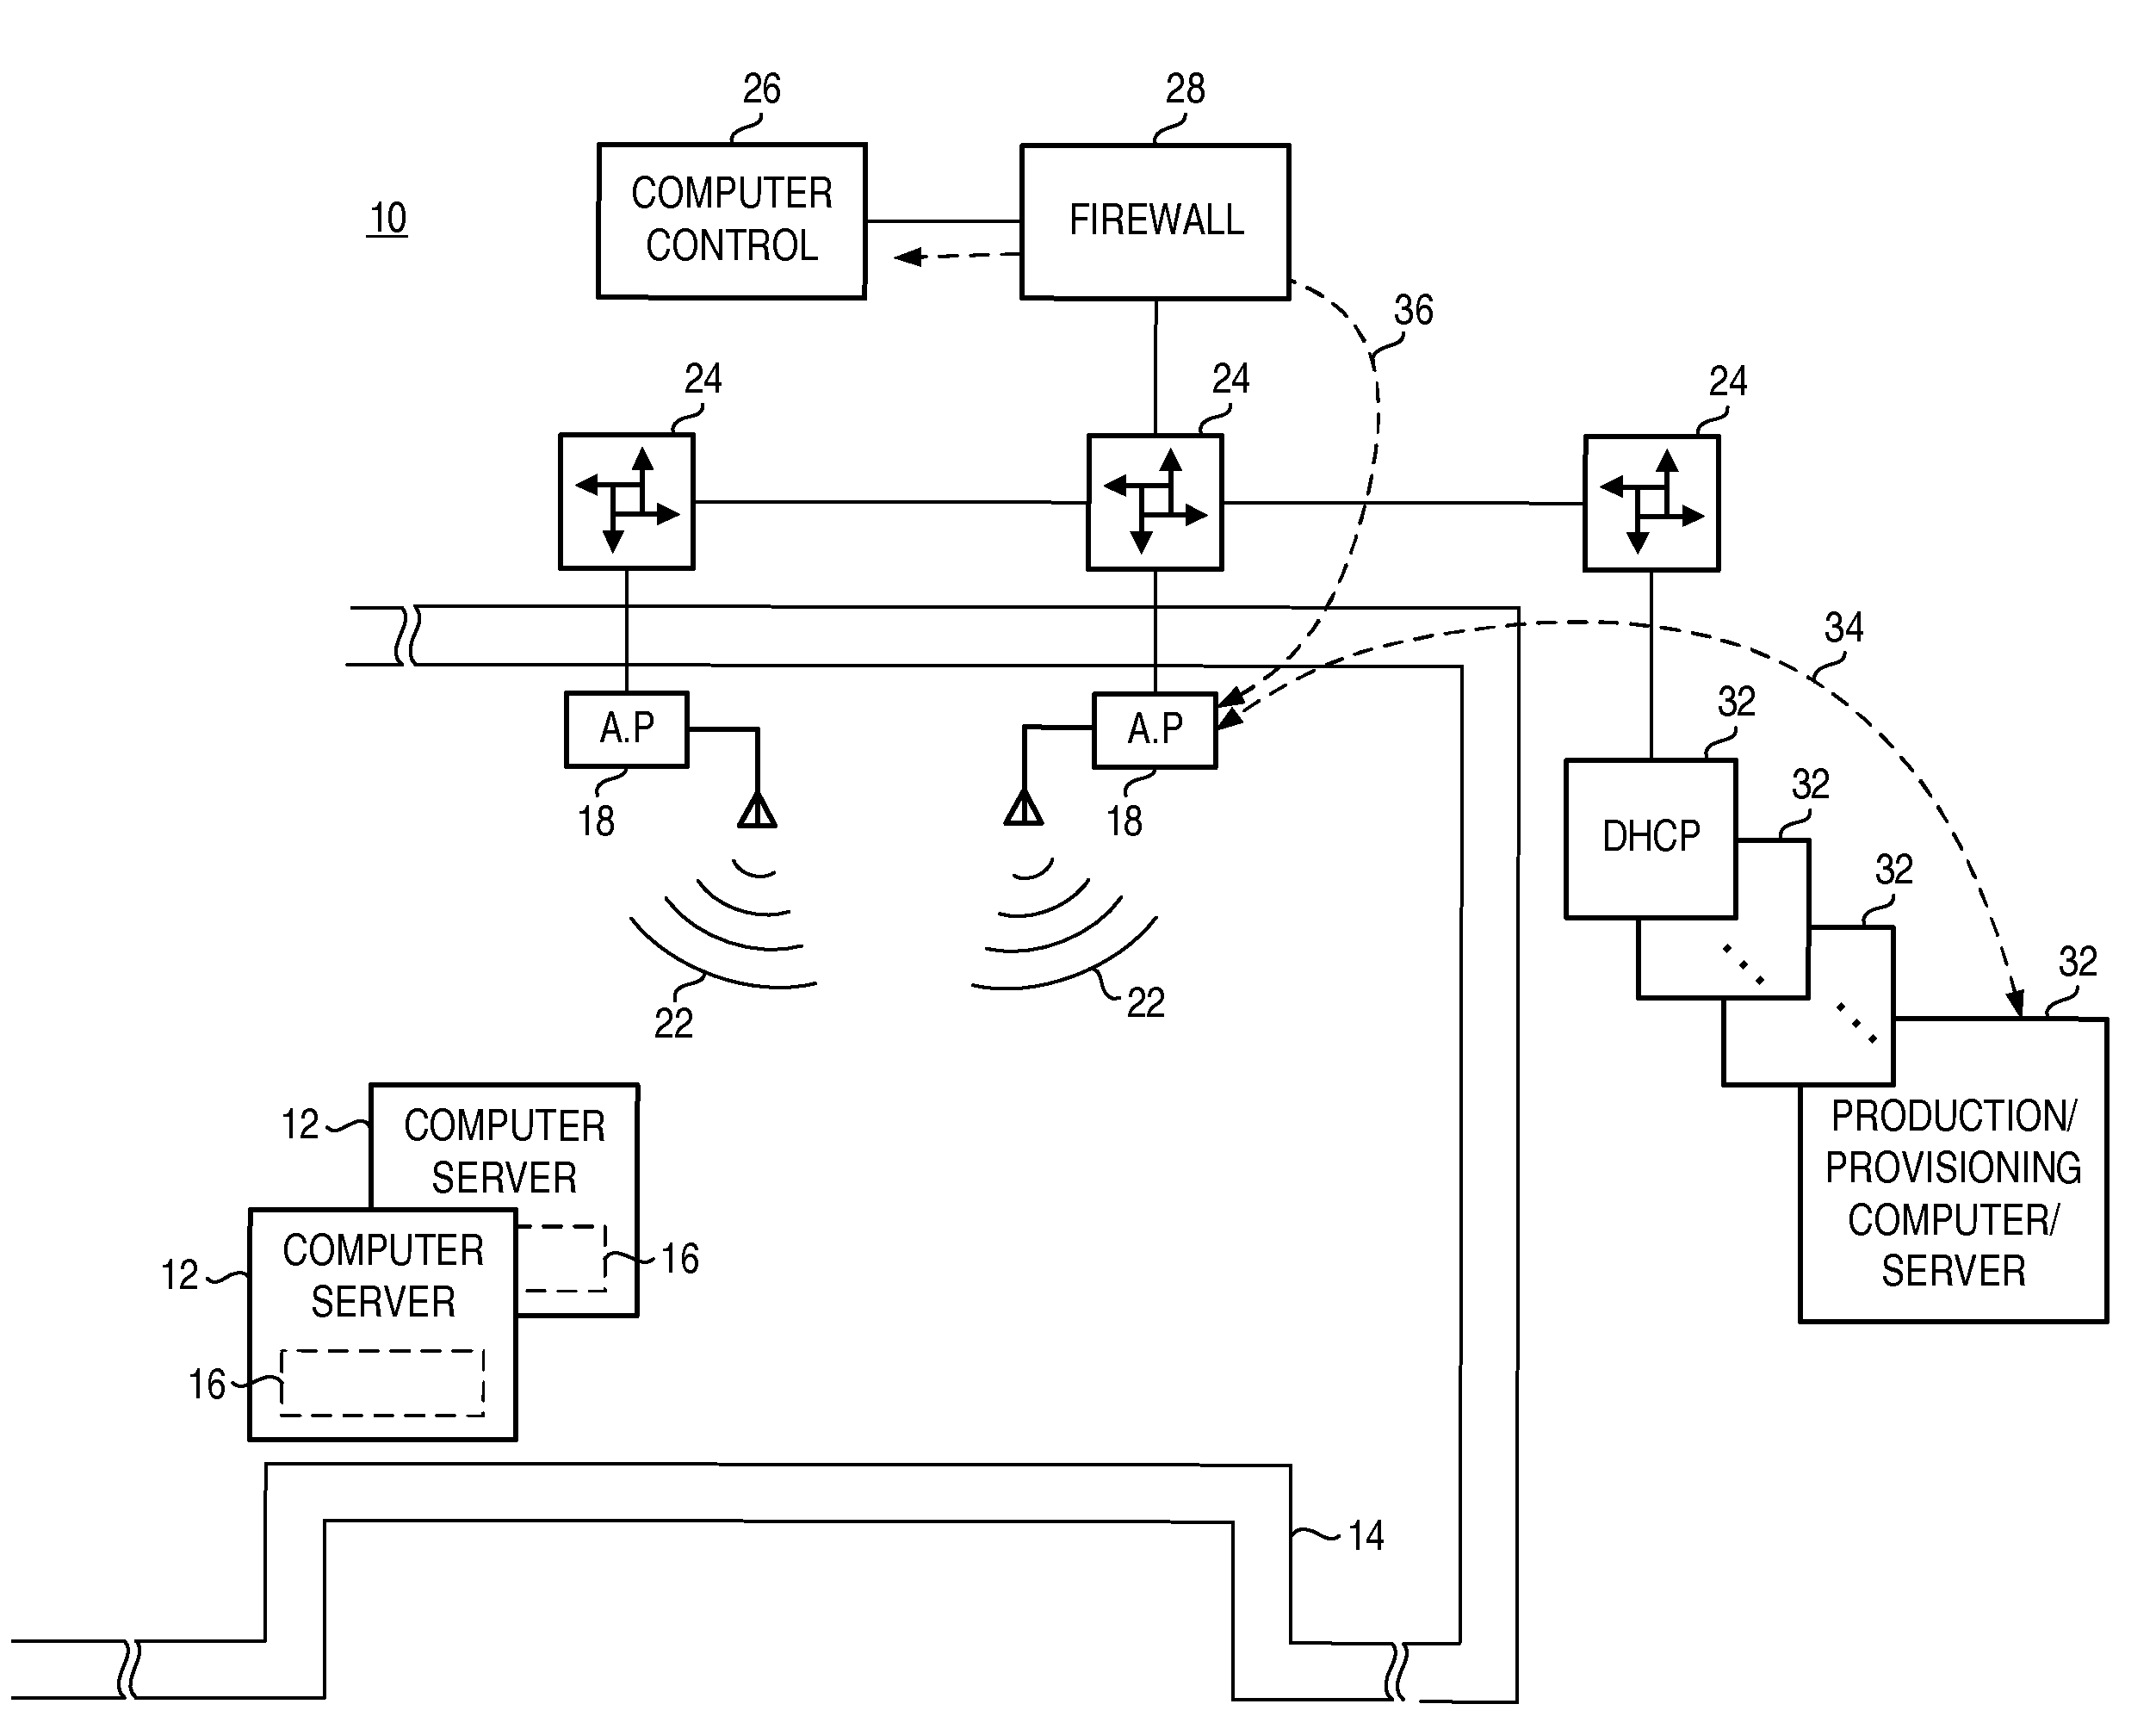 Assembly, and associated methodology, for provisioning computer device with operating software